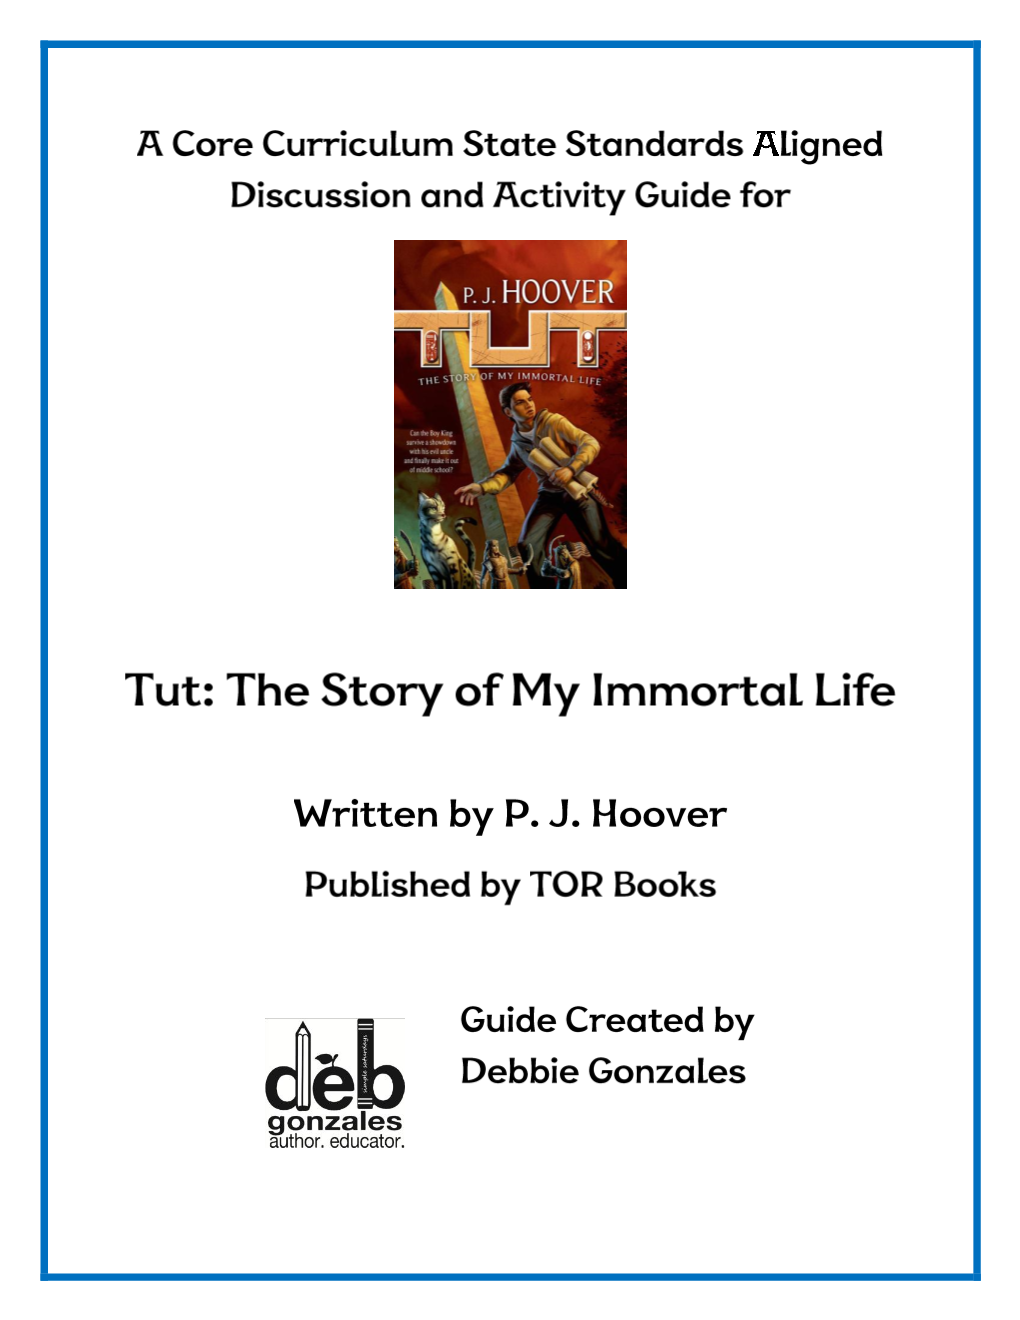 Tut: the Story of My Immortal Life